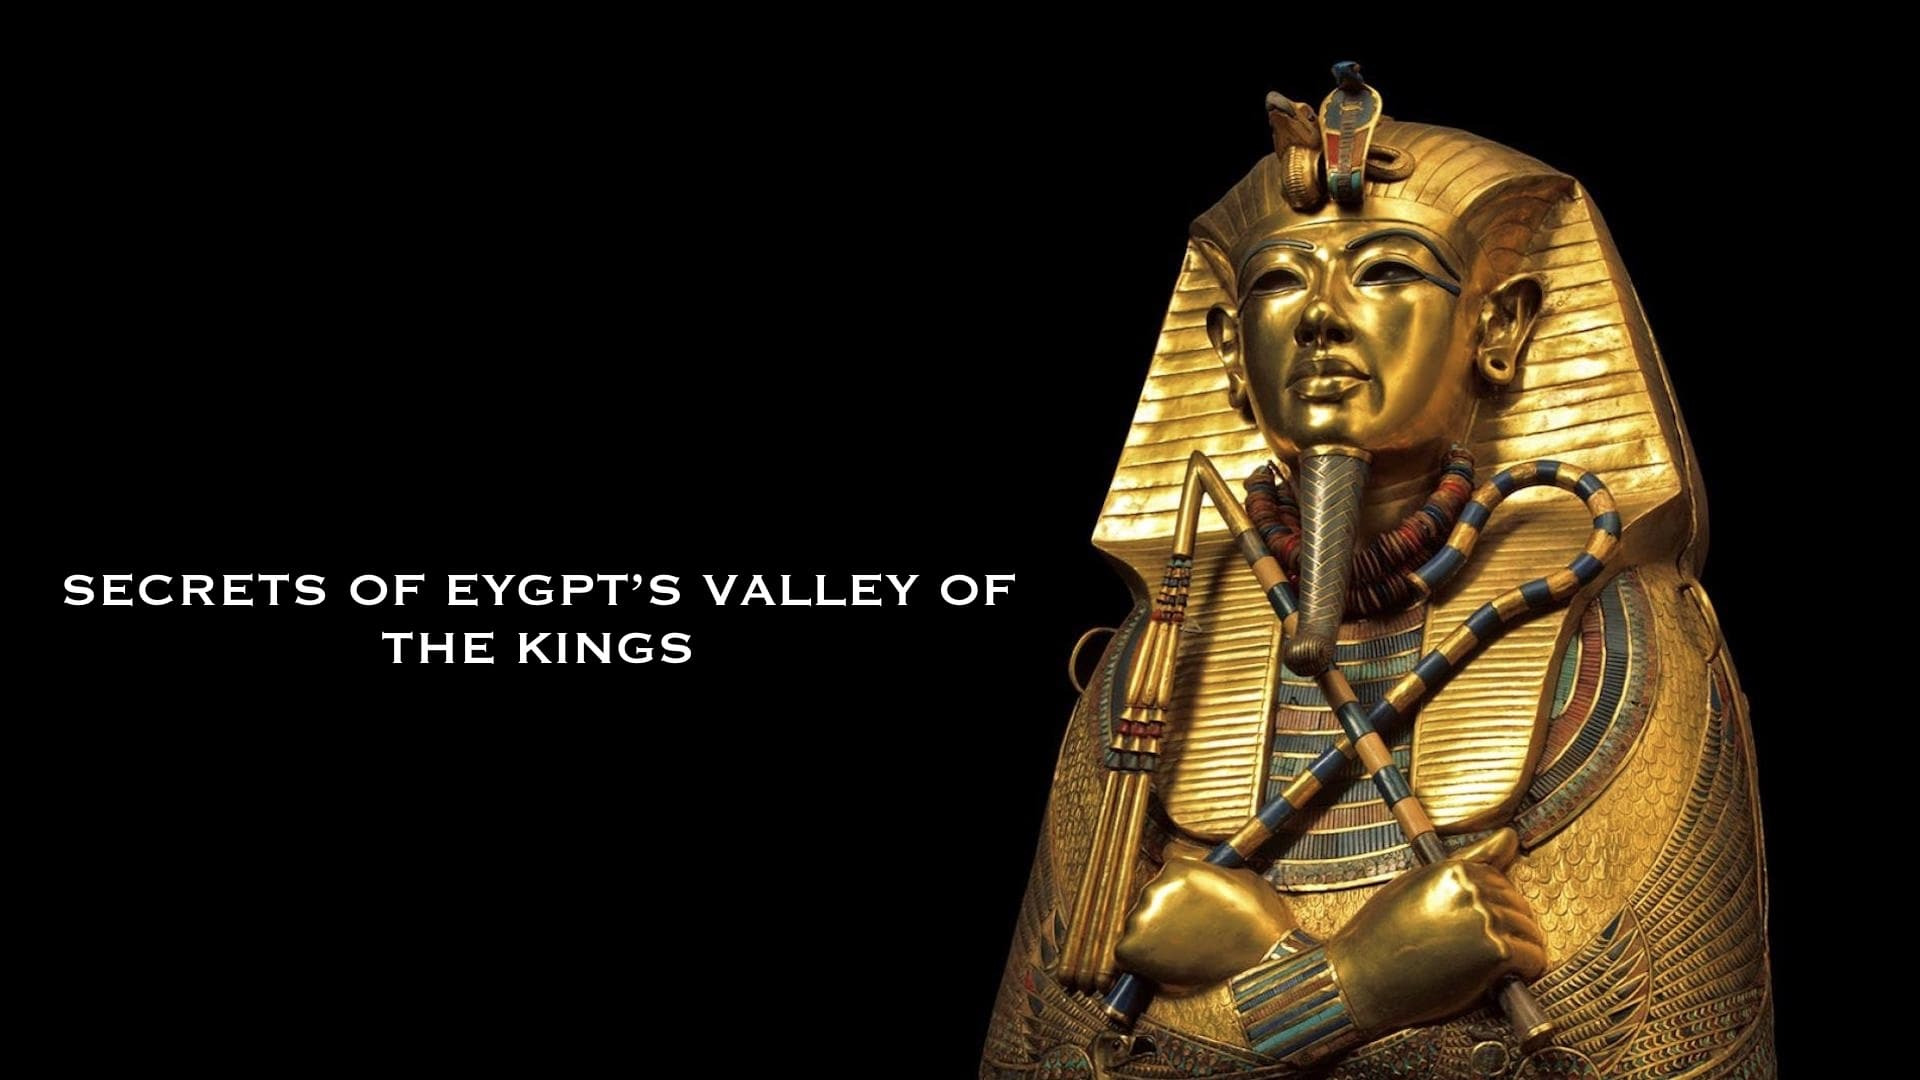 Show Secrets of Egypt's Valley of the Kings